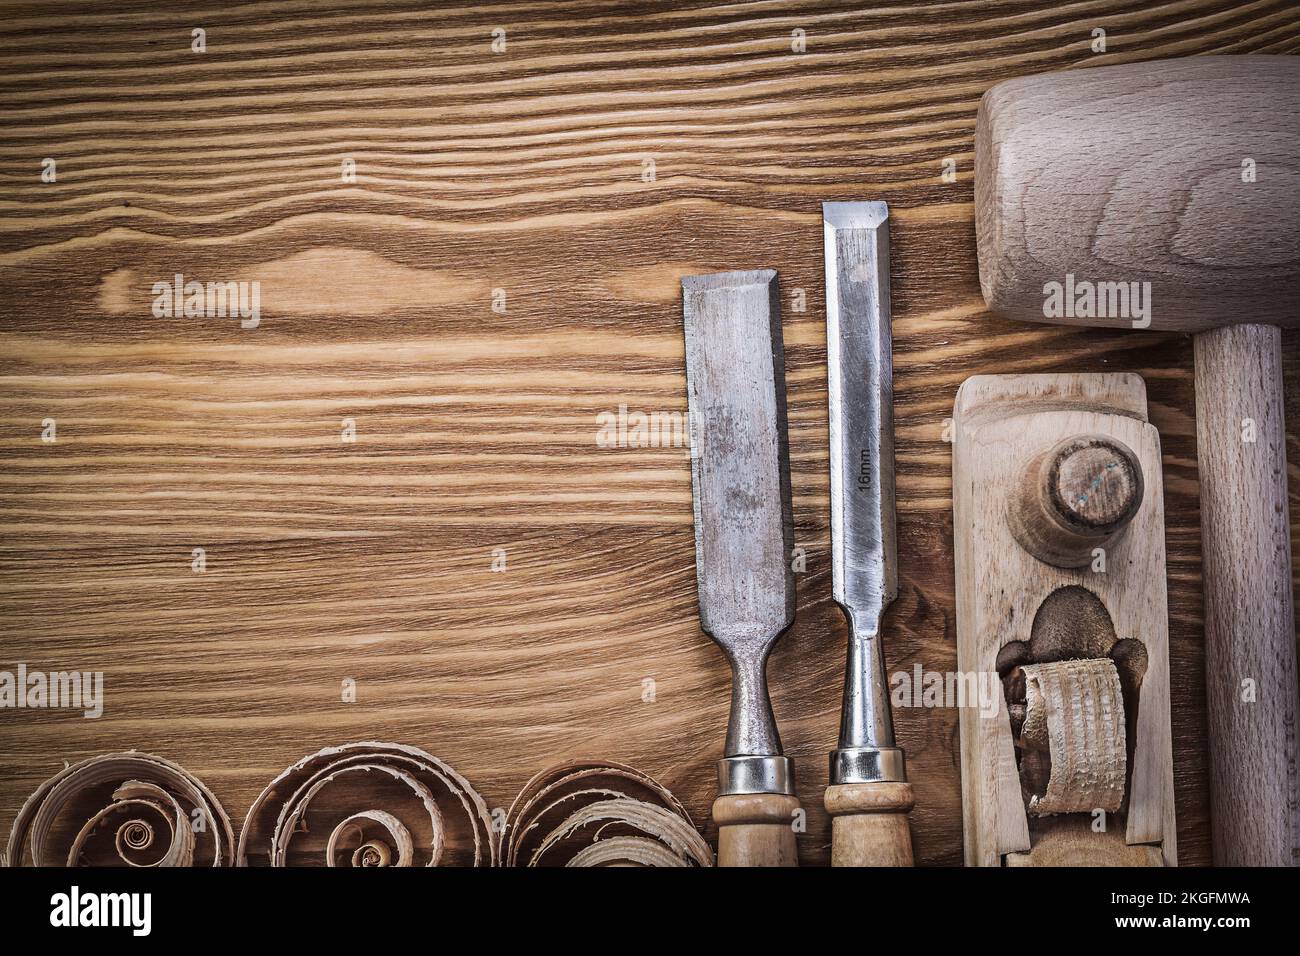 Wooden hammer planer chisels curled shavings on vintage wood board construction concept. Stock Photo